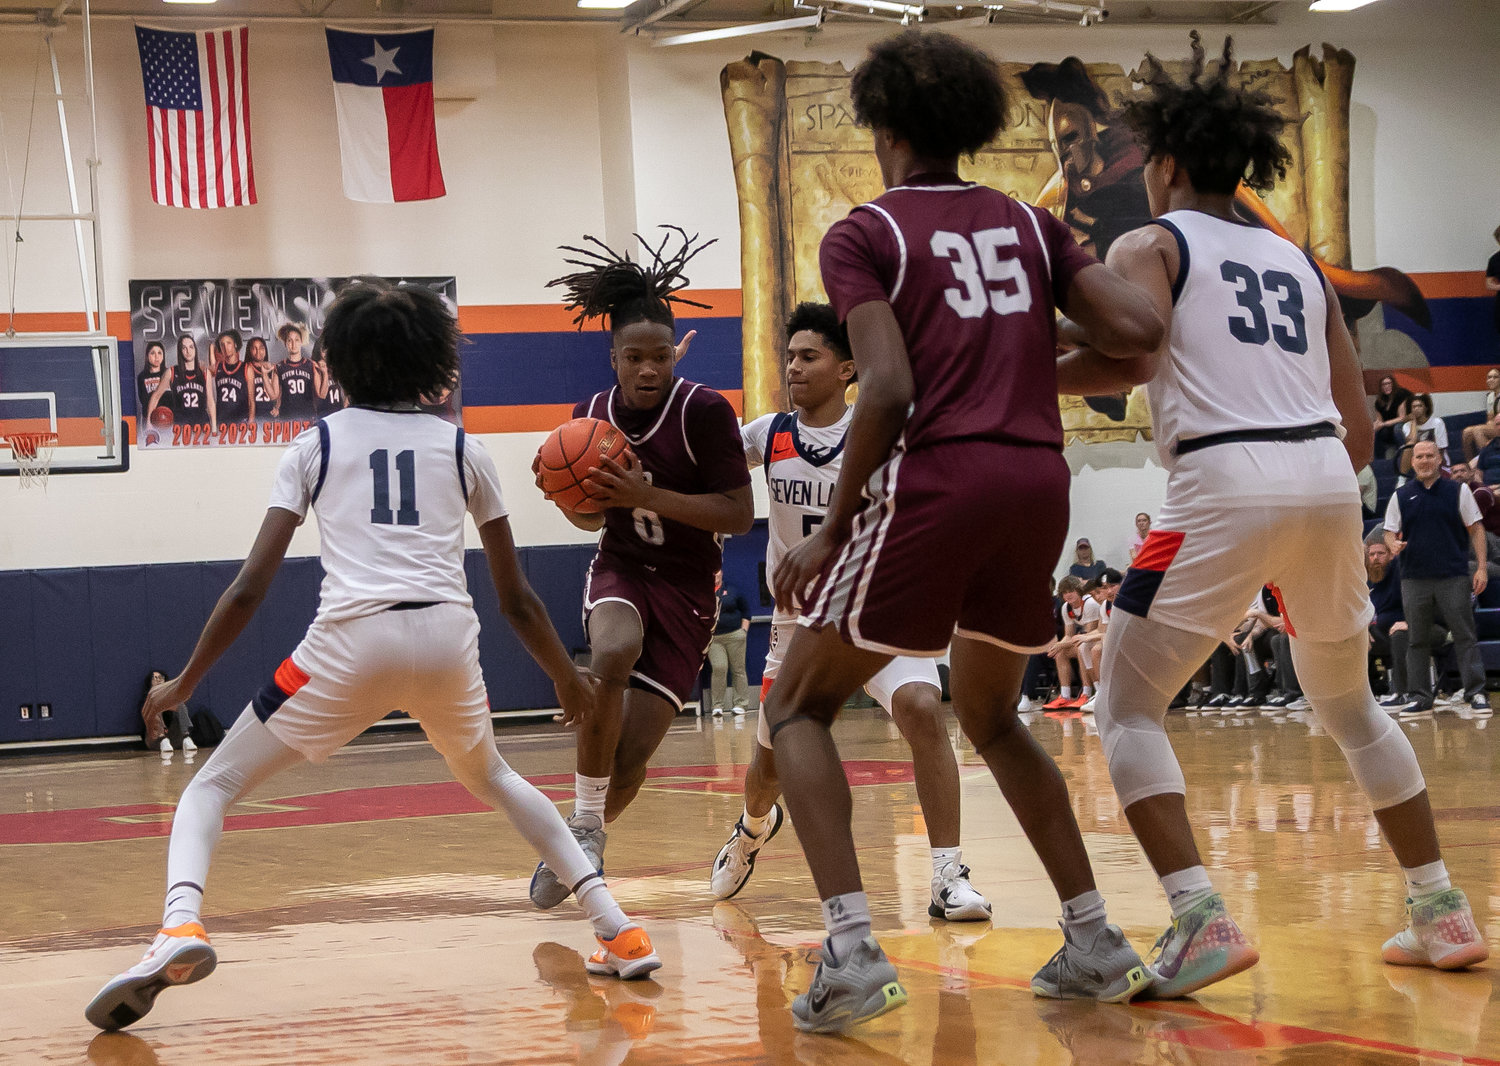 Prince Jones Bynum drives through the Seven Lakes defense during Saturday's game between Seven Lakes and Cinco Ranch at the Seven Lakes gym.